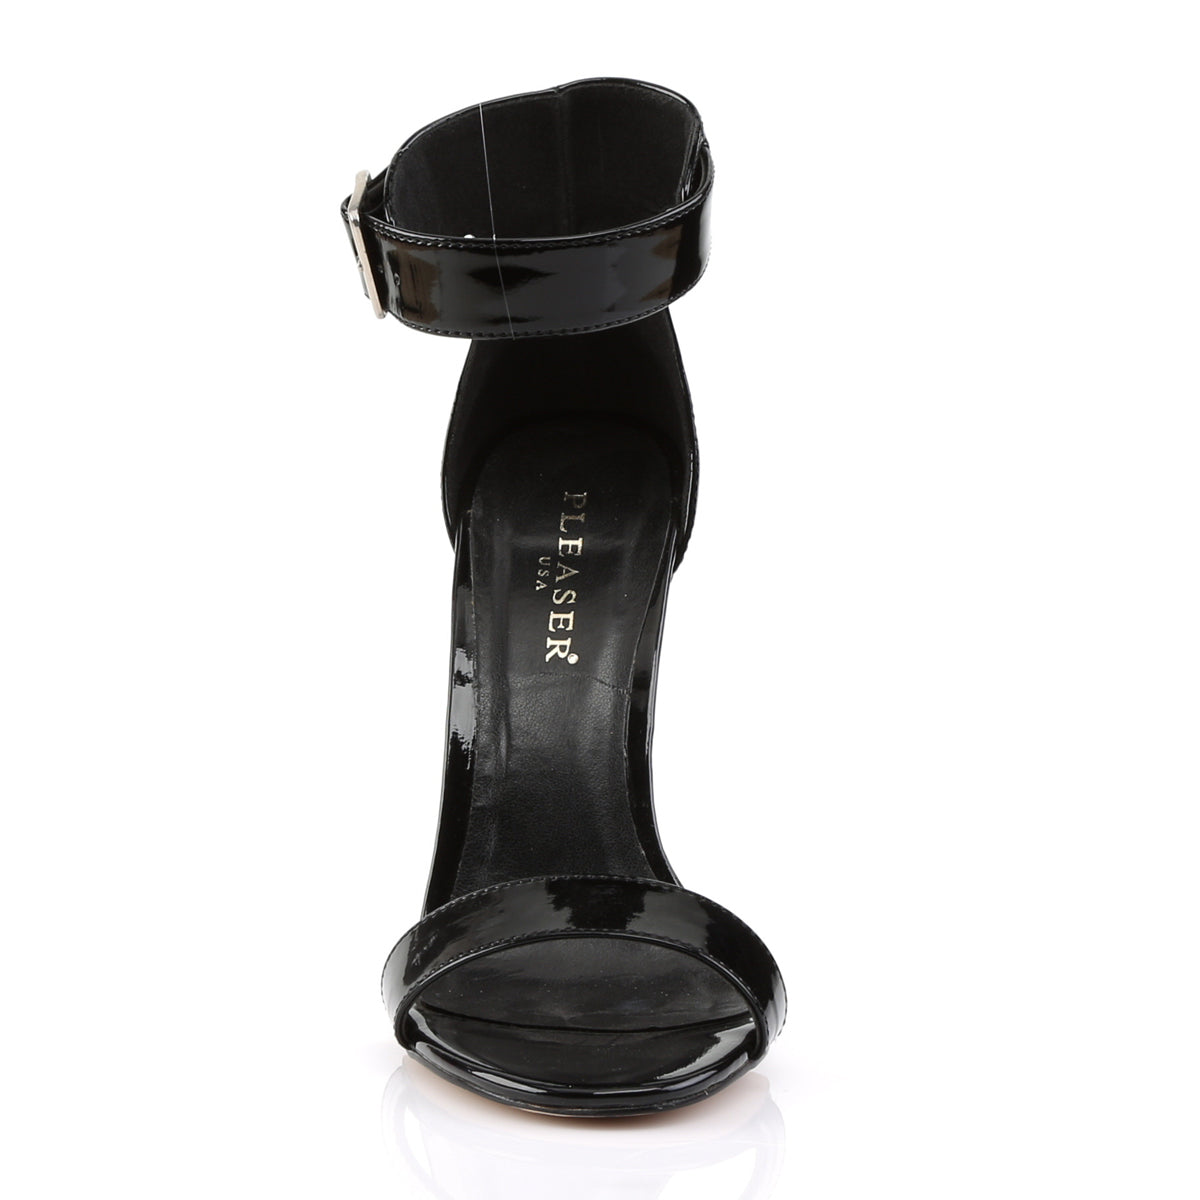 AMUSE-10 / B 5 "PLEASER FAST DELIVERY 24-48h 